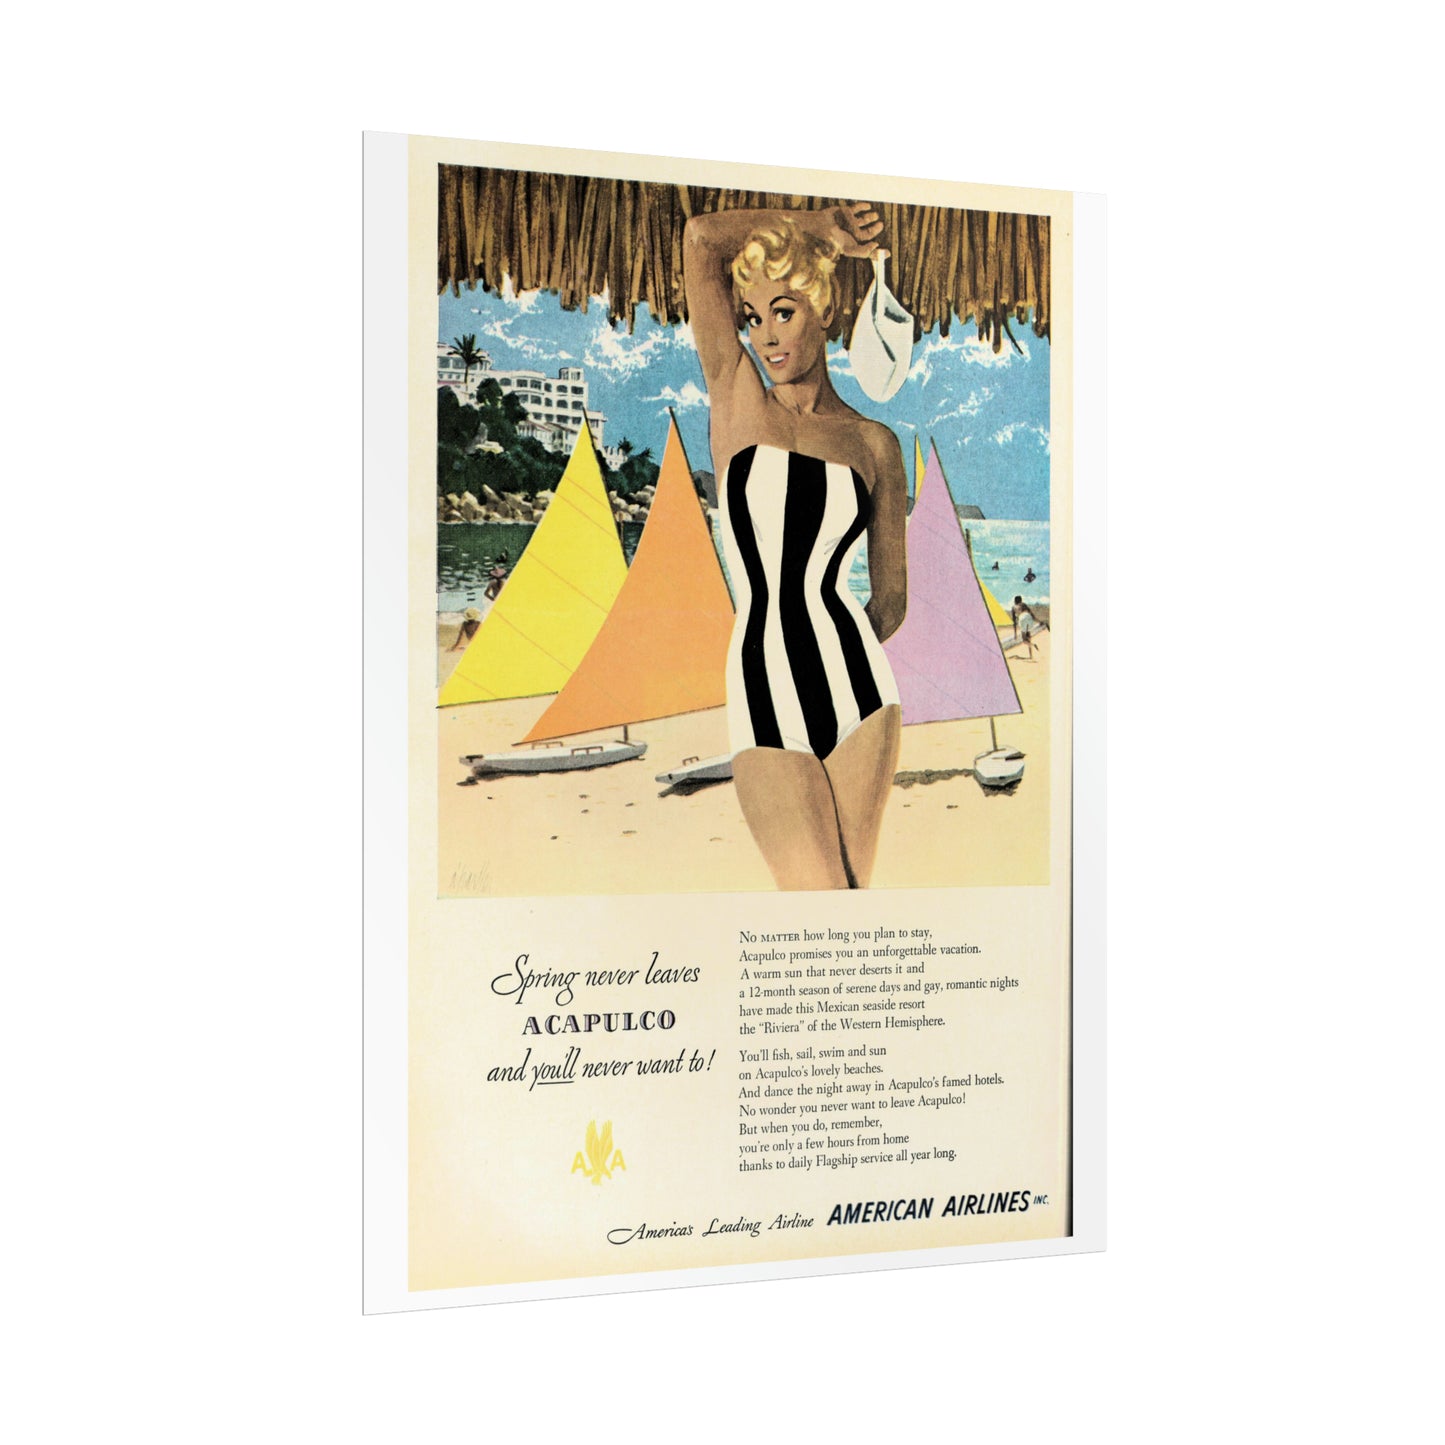 Vintage Acapulco travel poster featuring a smiling woman in a black and white striped swimsuit, colorful sailboats on a blue sea, palm trees, a beach resort in the background, under a clear sky with text promoting Acapulco vacations by American Airlines.